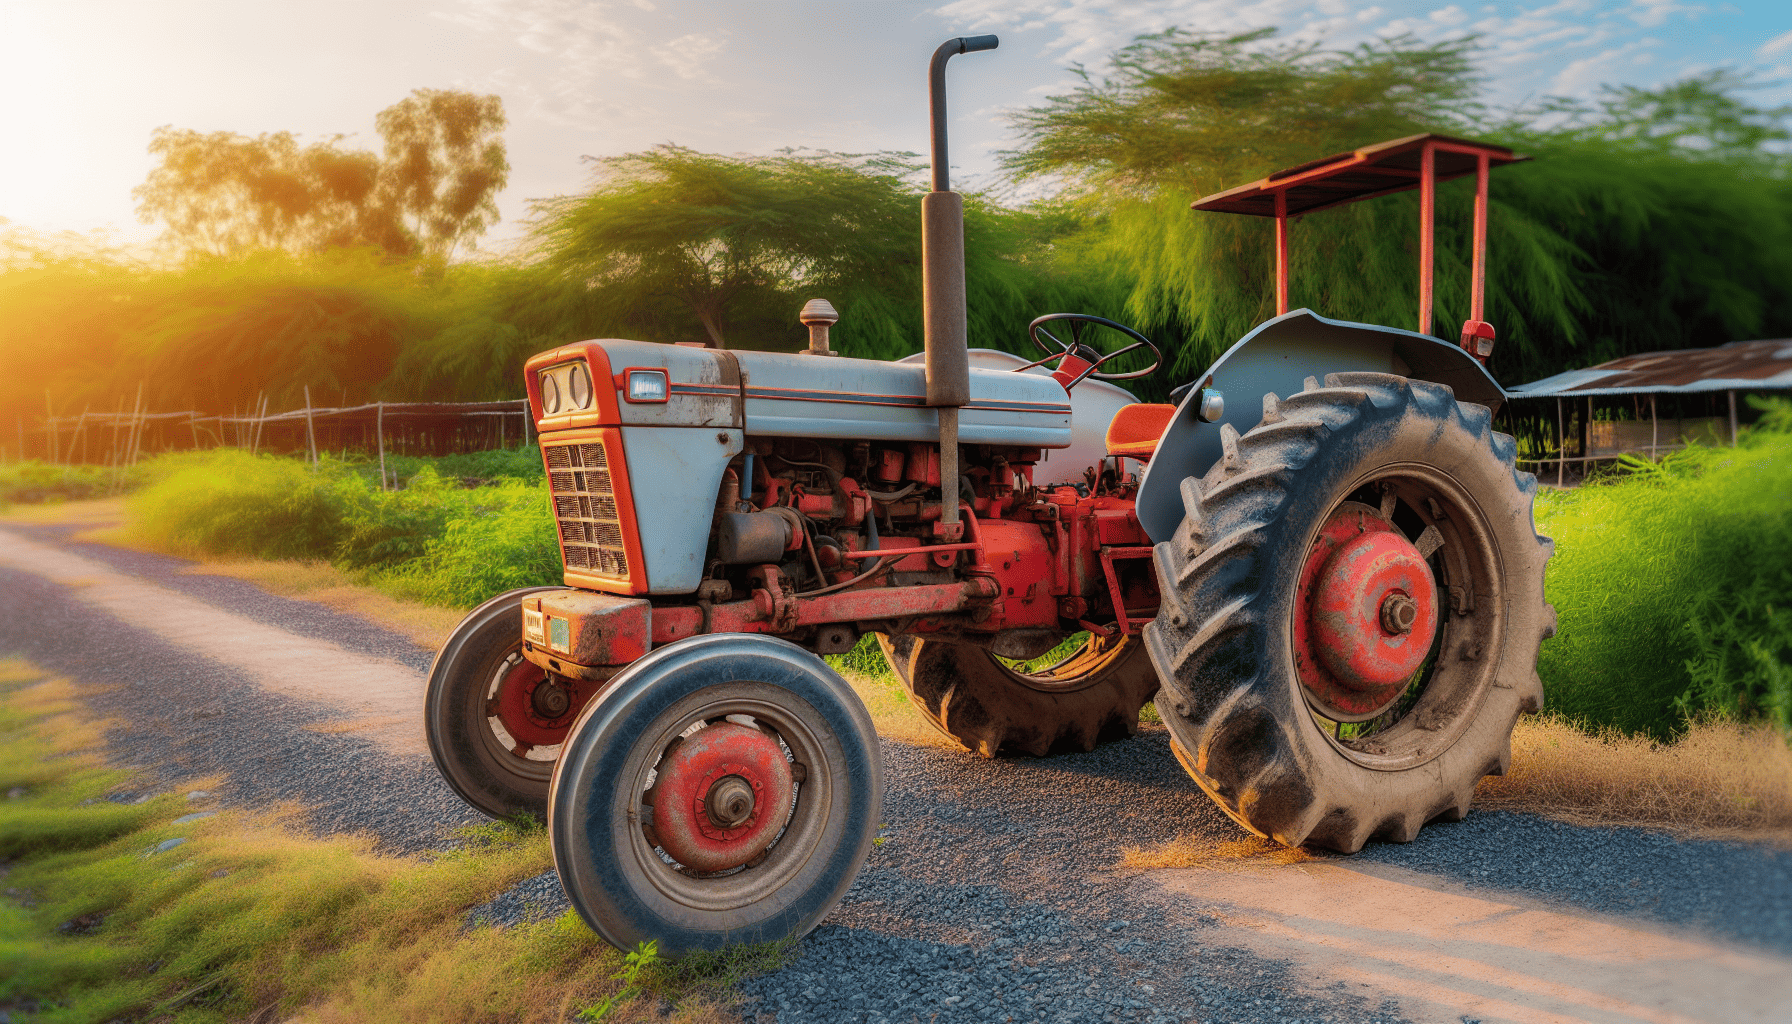 A well-maintained used tractor in a farm setting